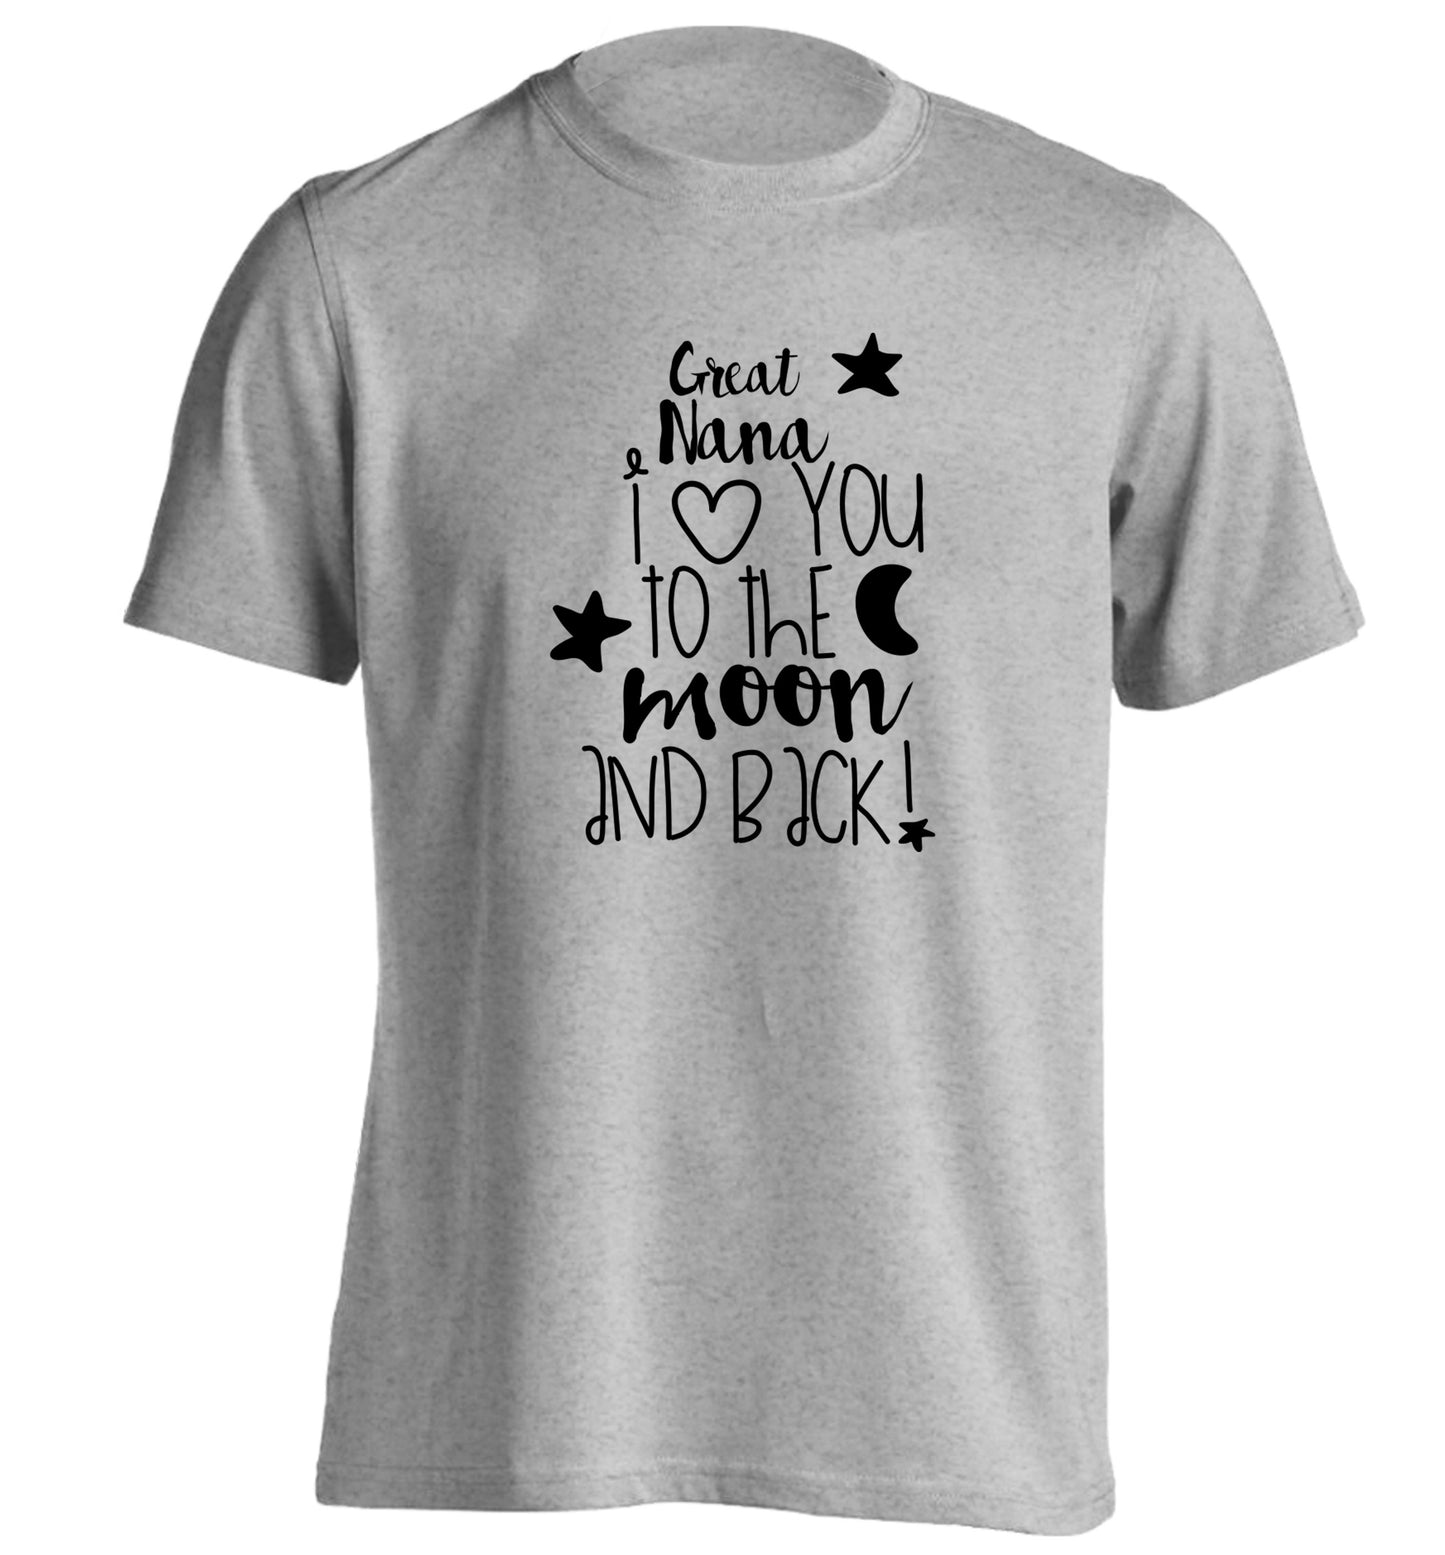 Great Nana I love you to the moon and back adults unisex grey Tshirt 2XL